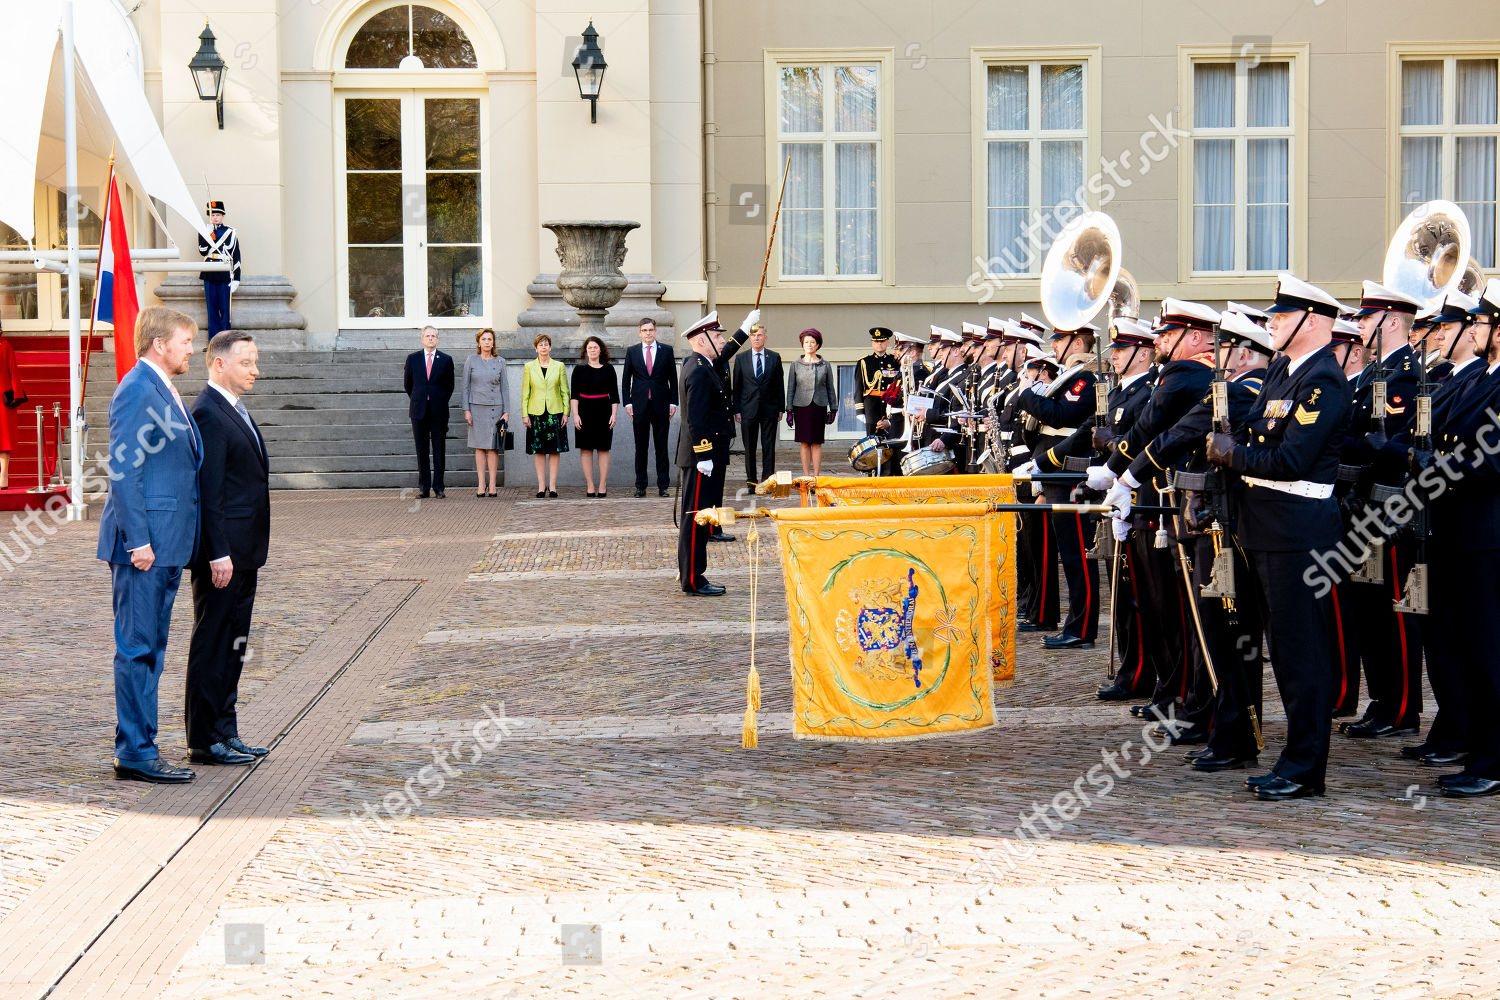 poland-president-andrzej-duda-official-visit-to-the-netherlands-shutterstock-editorial-10459439ad.jpg